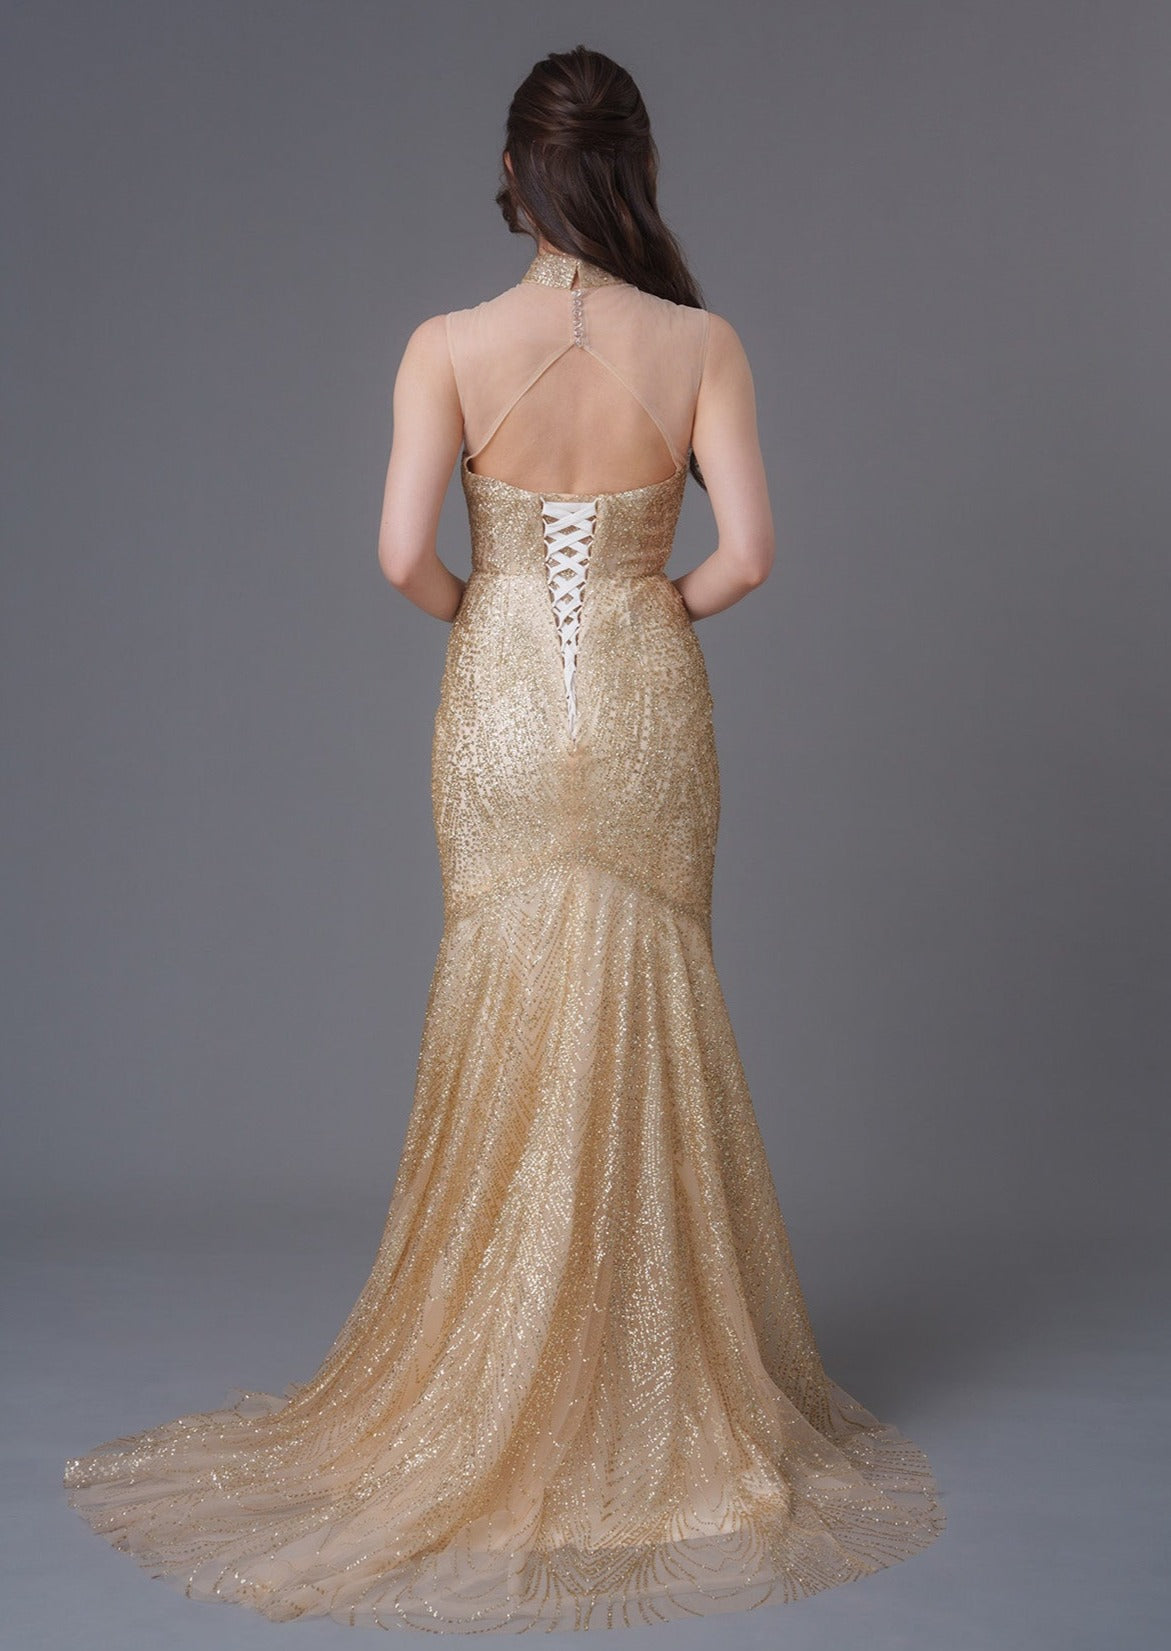 Qipology - An asian girl in a sleeveless gold sequins mermaid qipao with mesh heart shape bodice. Featuring a mandarin collar, open back and lace up details.Perfect dress for cocktail parties/ wedding. (back full body picture)